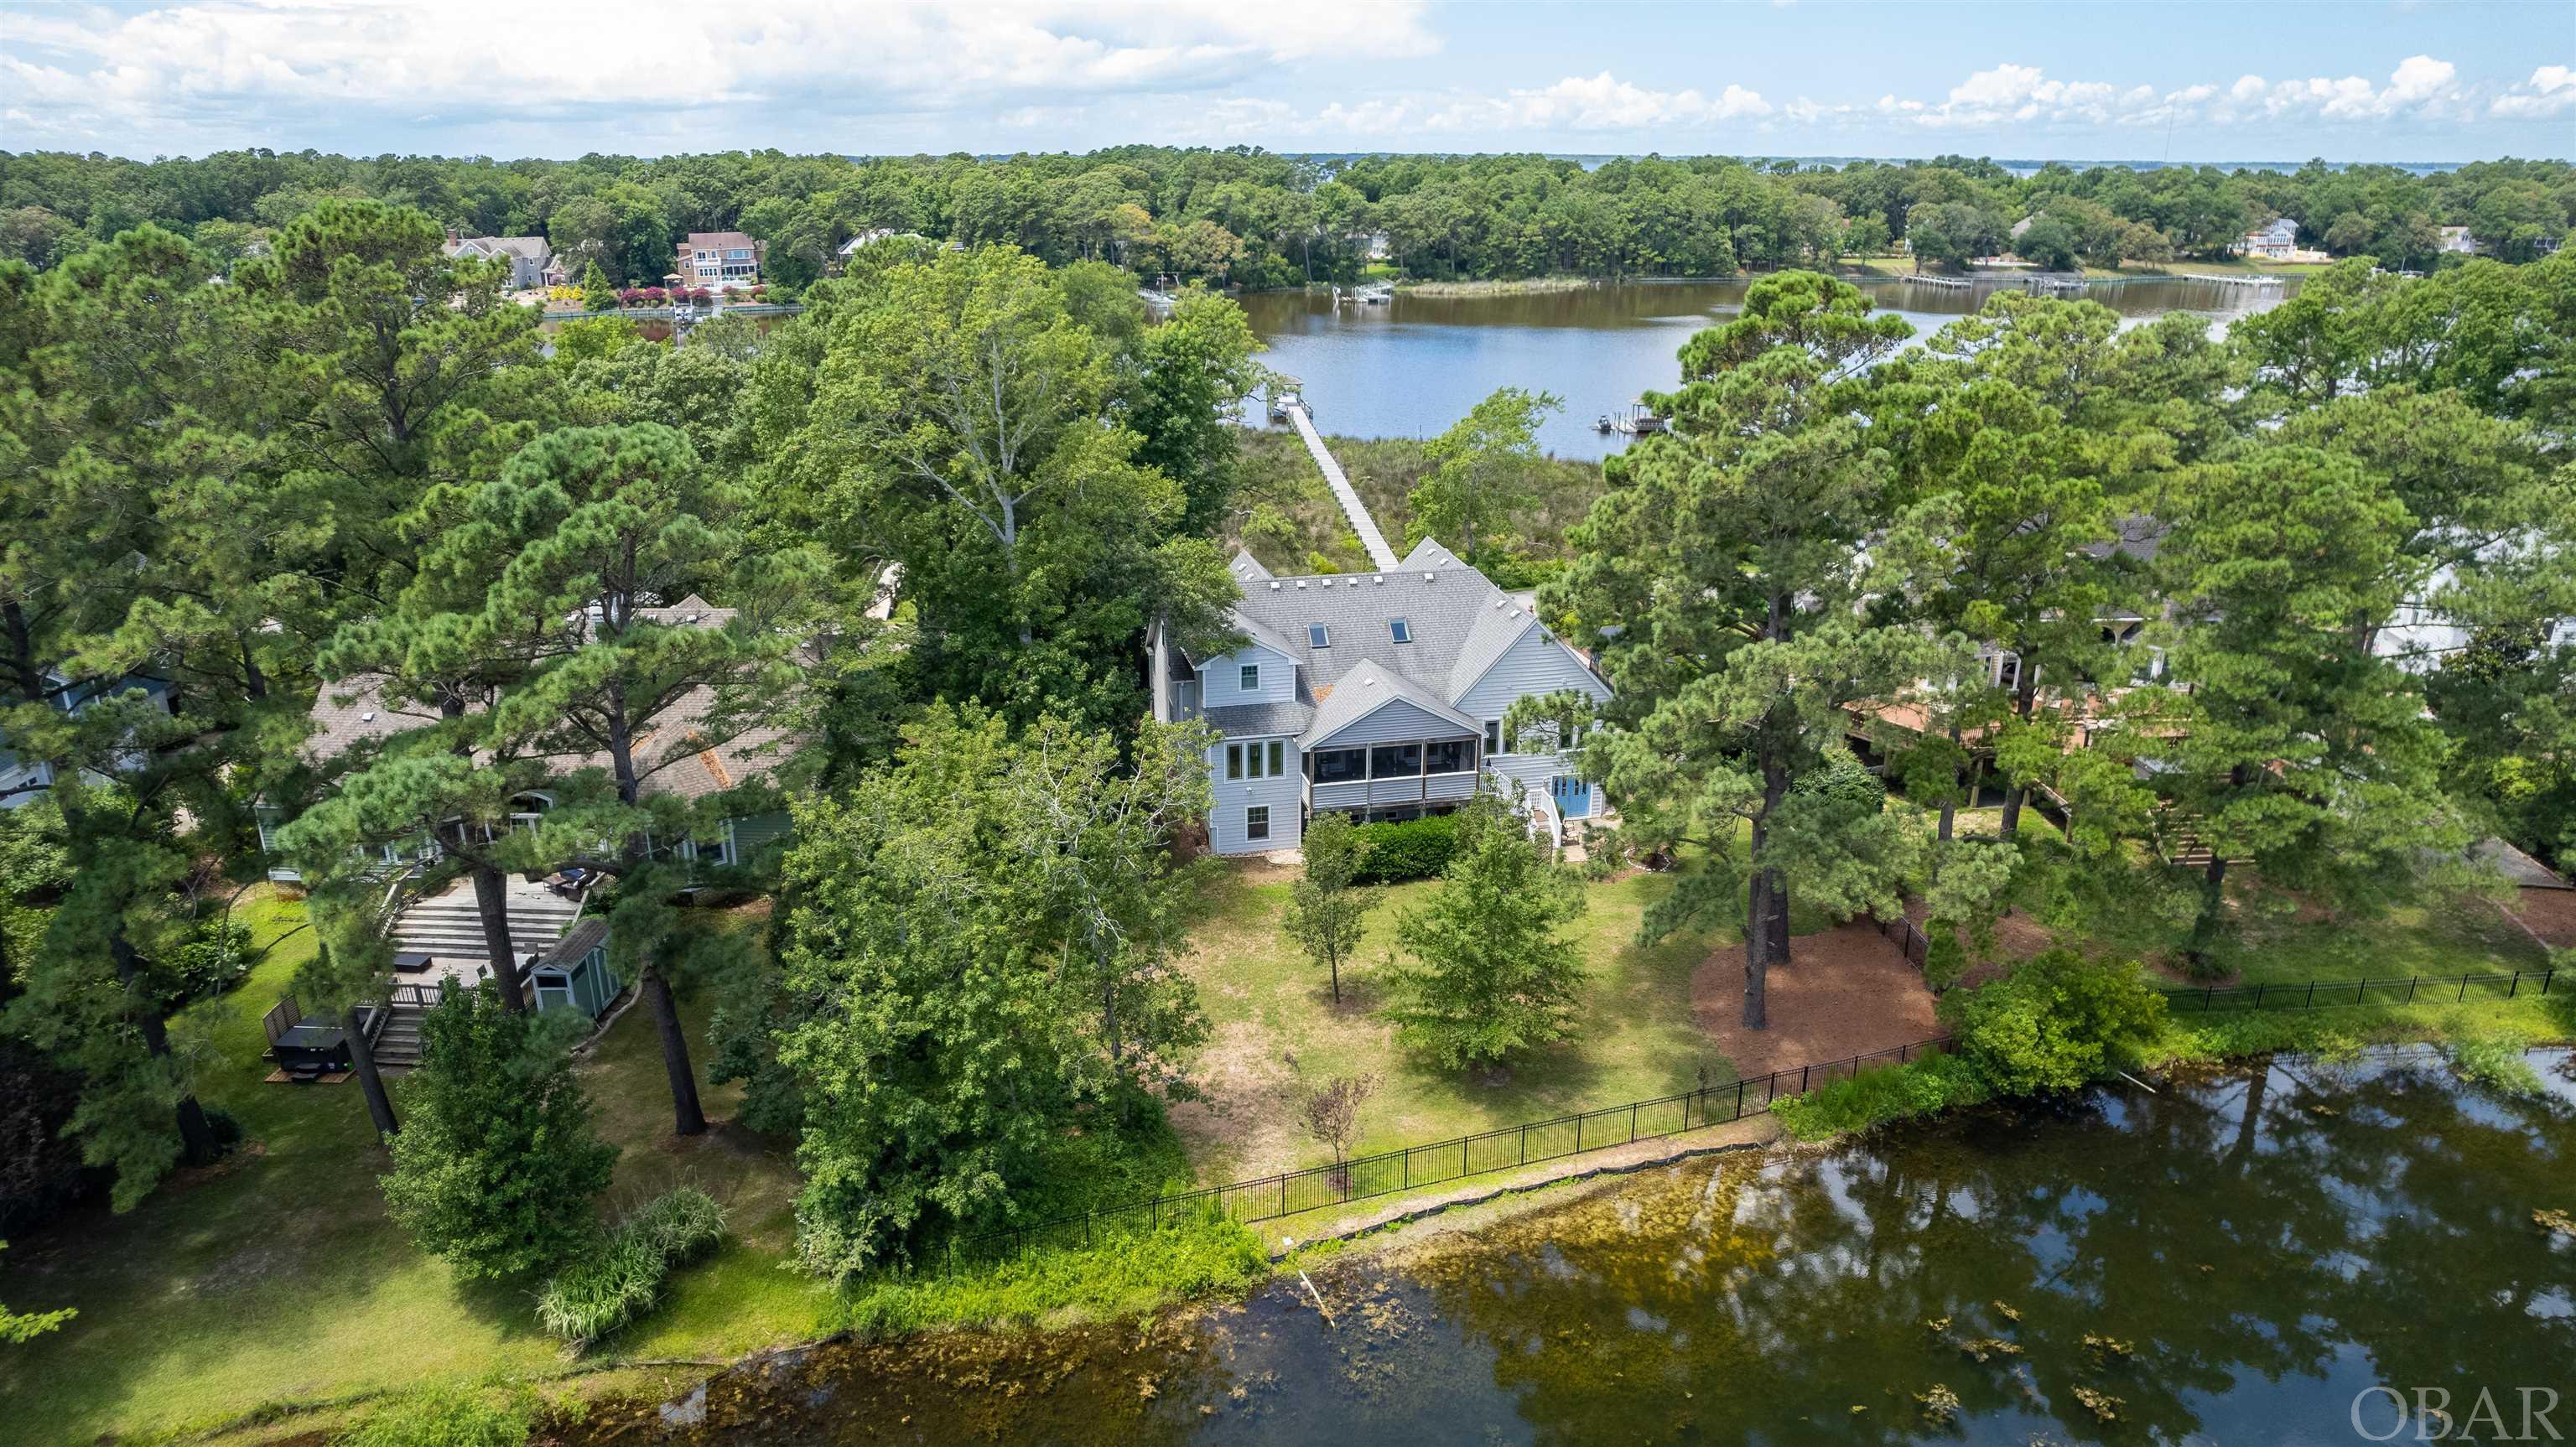 42 Ginguite Trail, Southern Shores, NC 27949, 4 Bedrooms Bedrooms, ,4 BathroomsBathrooms,Residential,For Sale,Ginguite Trail,119790